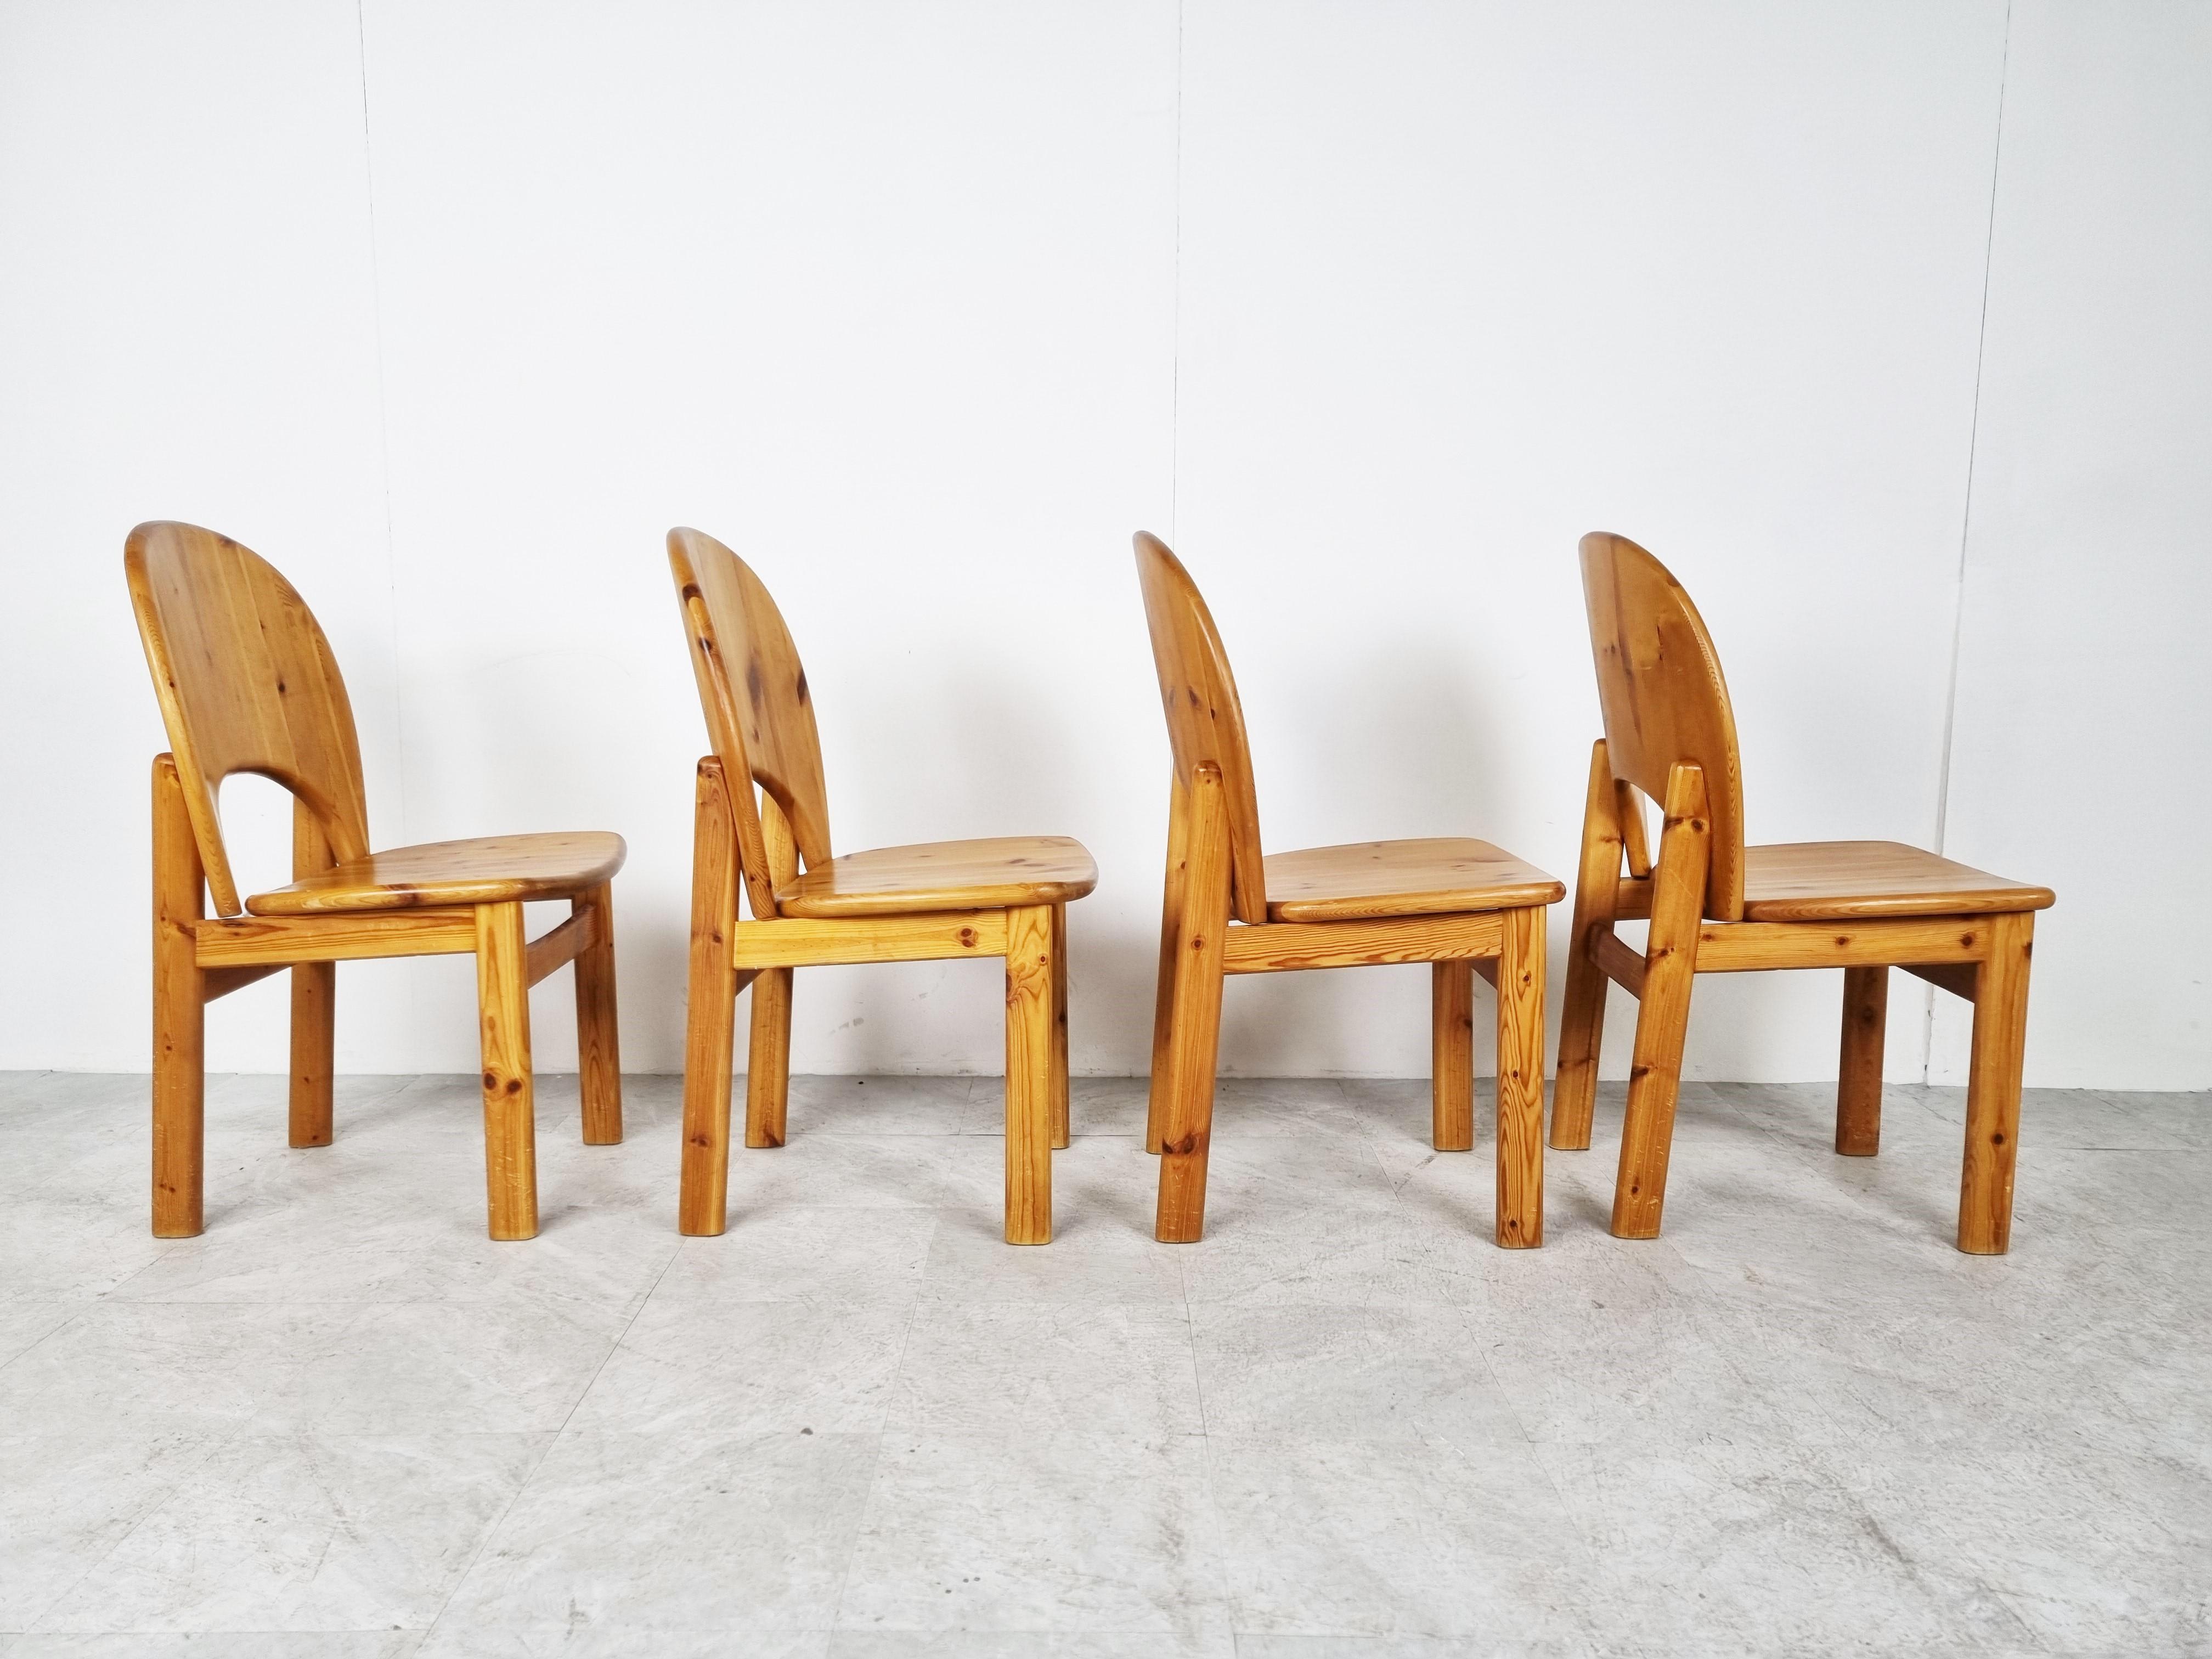 Set of 4 scandinavian pine wood dining chairs by Rainer Daumilier for Hirtshals Savvaerk

Nice and solid chairs.

Timeless and can be combined in lots of interiors.

Good condition

1980s - Denmark 

Dimensions:
Height: